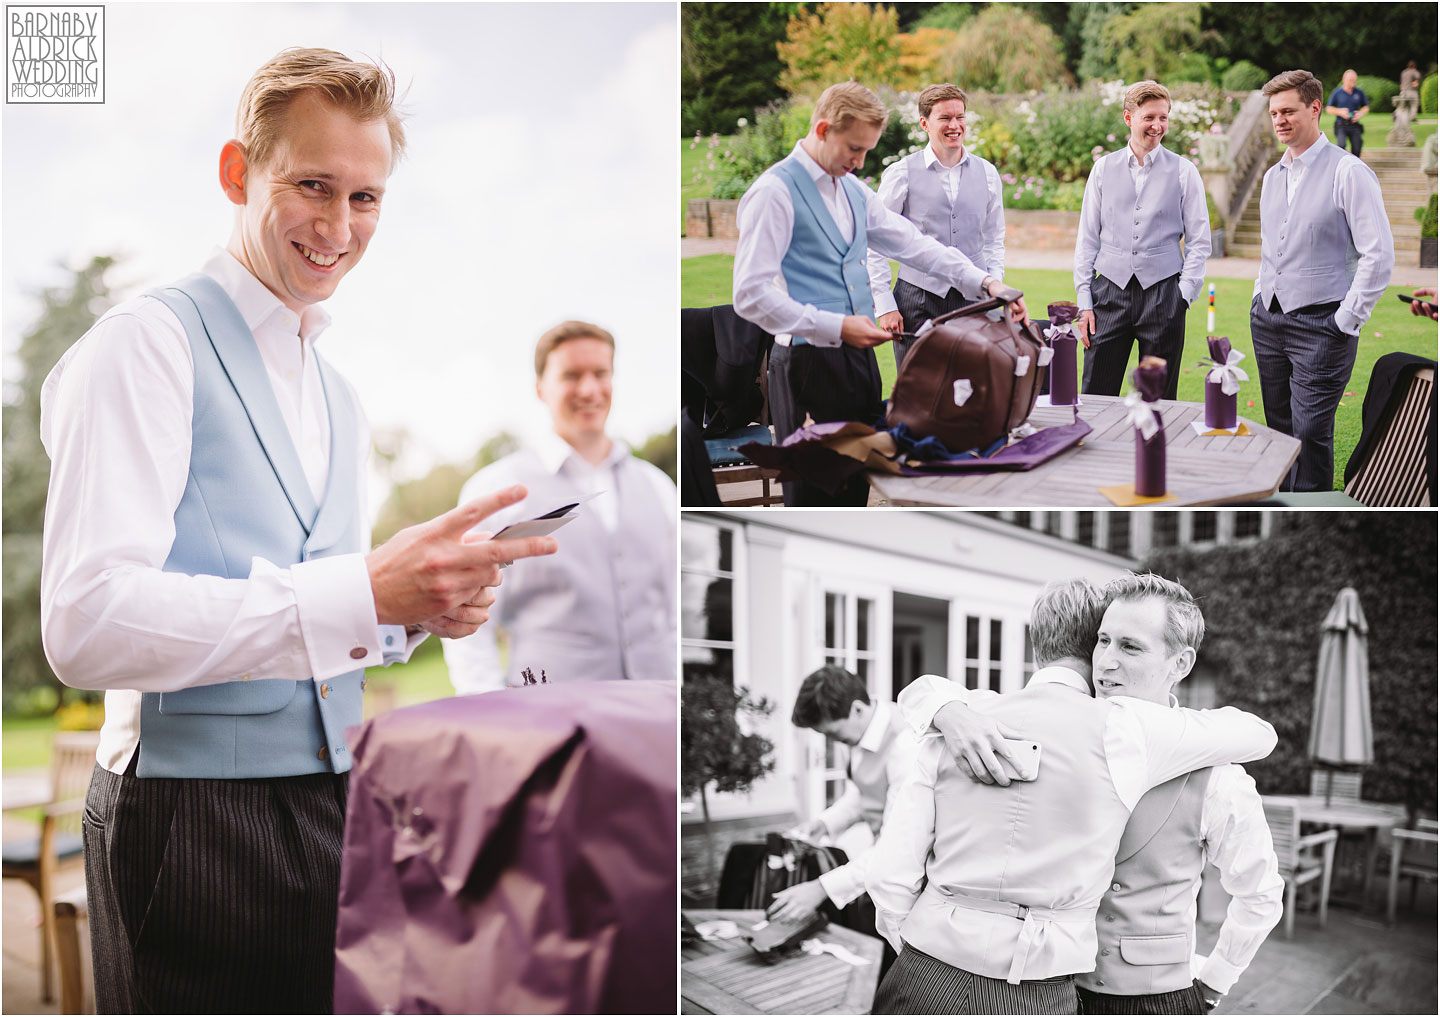 Grooms preparations at Goldsborough Hall Wedding Photos, Goldsborough Hall Wedding Photography, Yorkshire Wedding, Yorkshire Wedding Photographer, Knaresborough Wedding, Harrogate wedding venue, Yorkshire Stately House Wedding